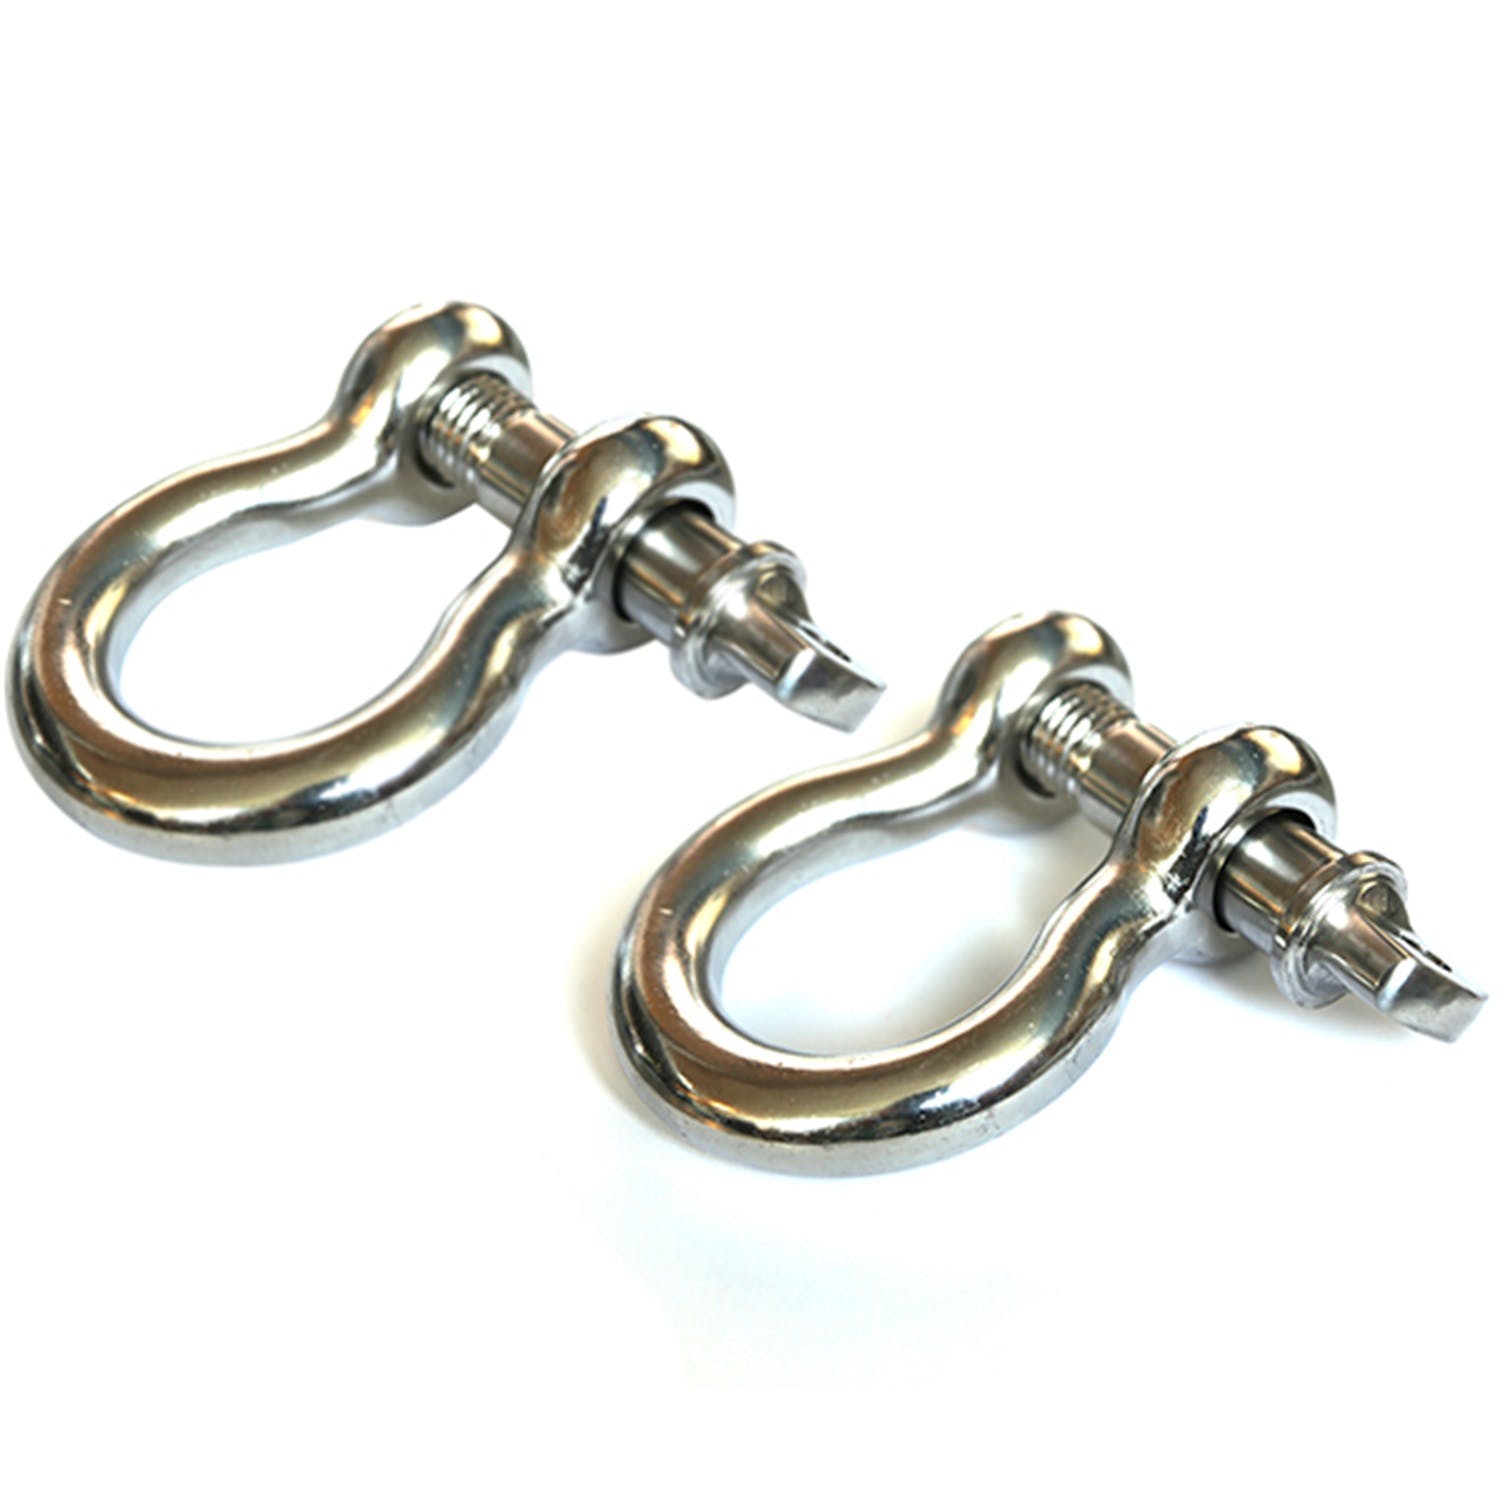 Rugged Ridge 11235.07 D-Ring Shackles; 7/8 Inch; Stainless Steel; Pair